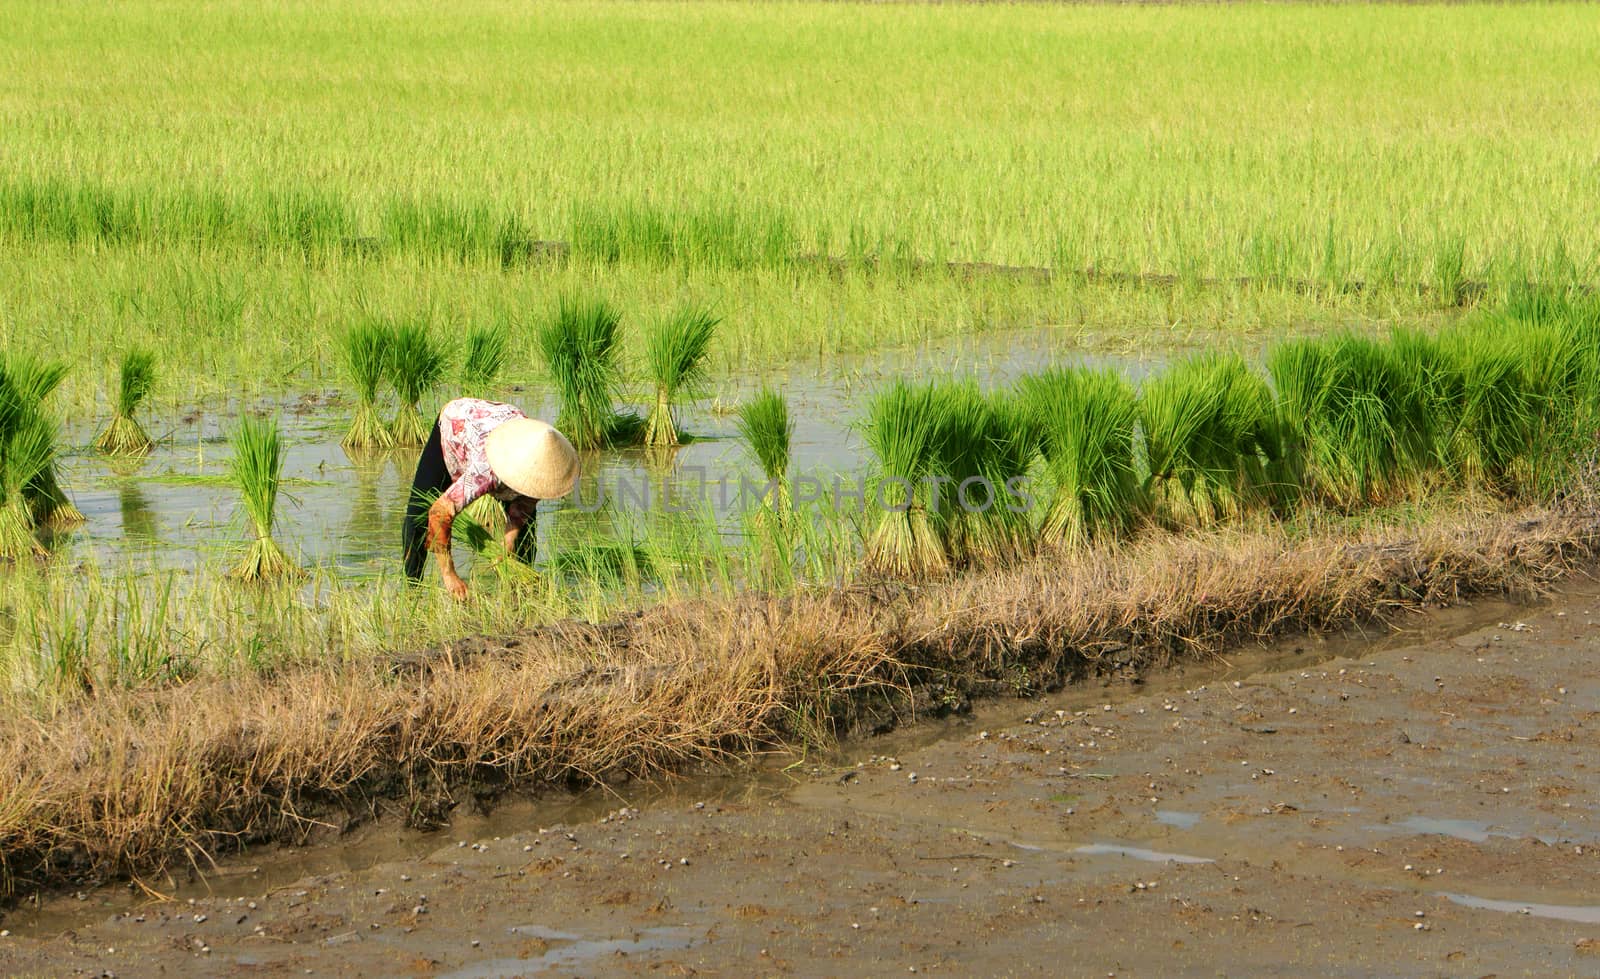 Farmer working on rice field by xuanhuongho